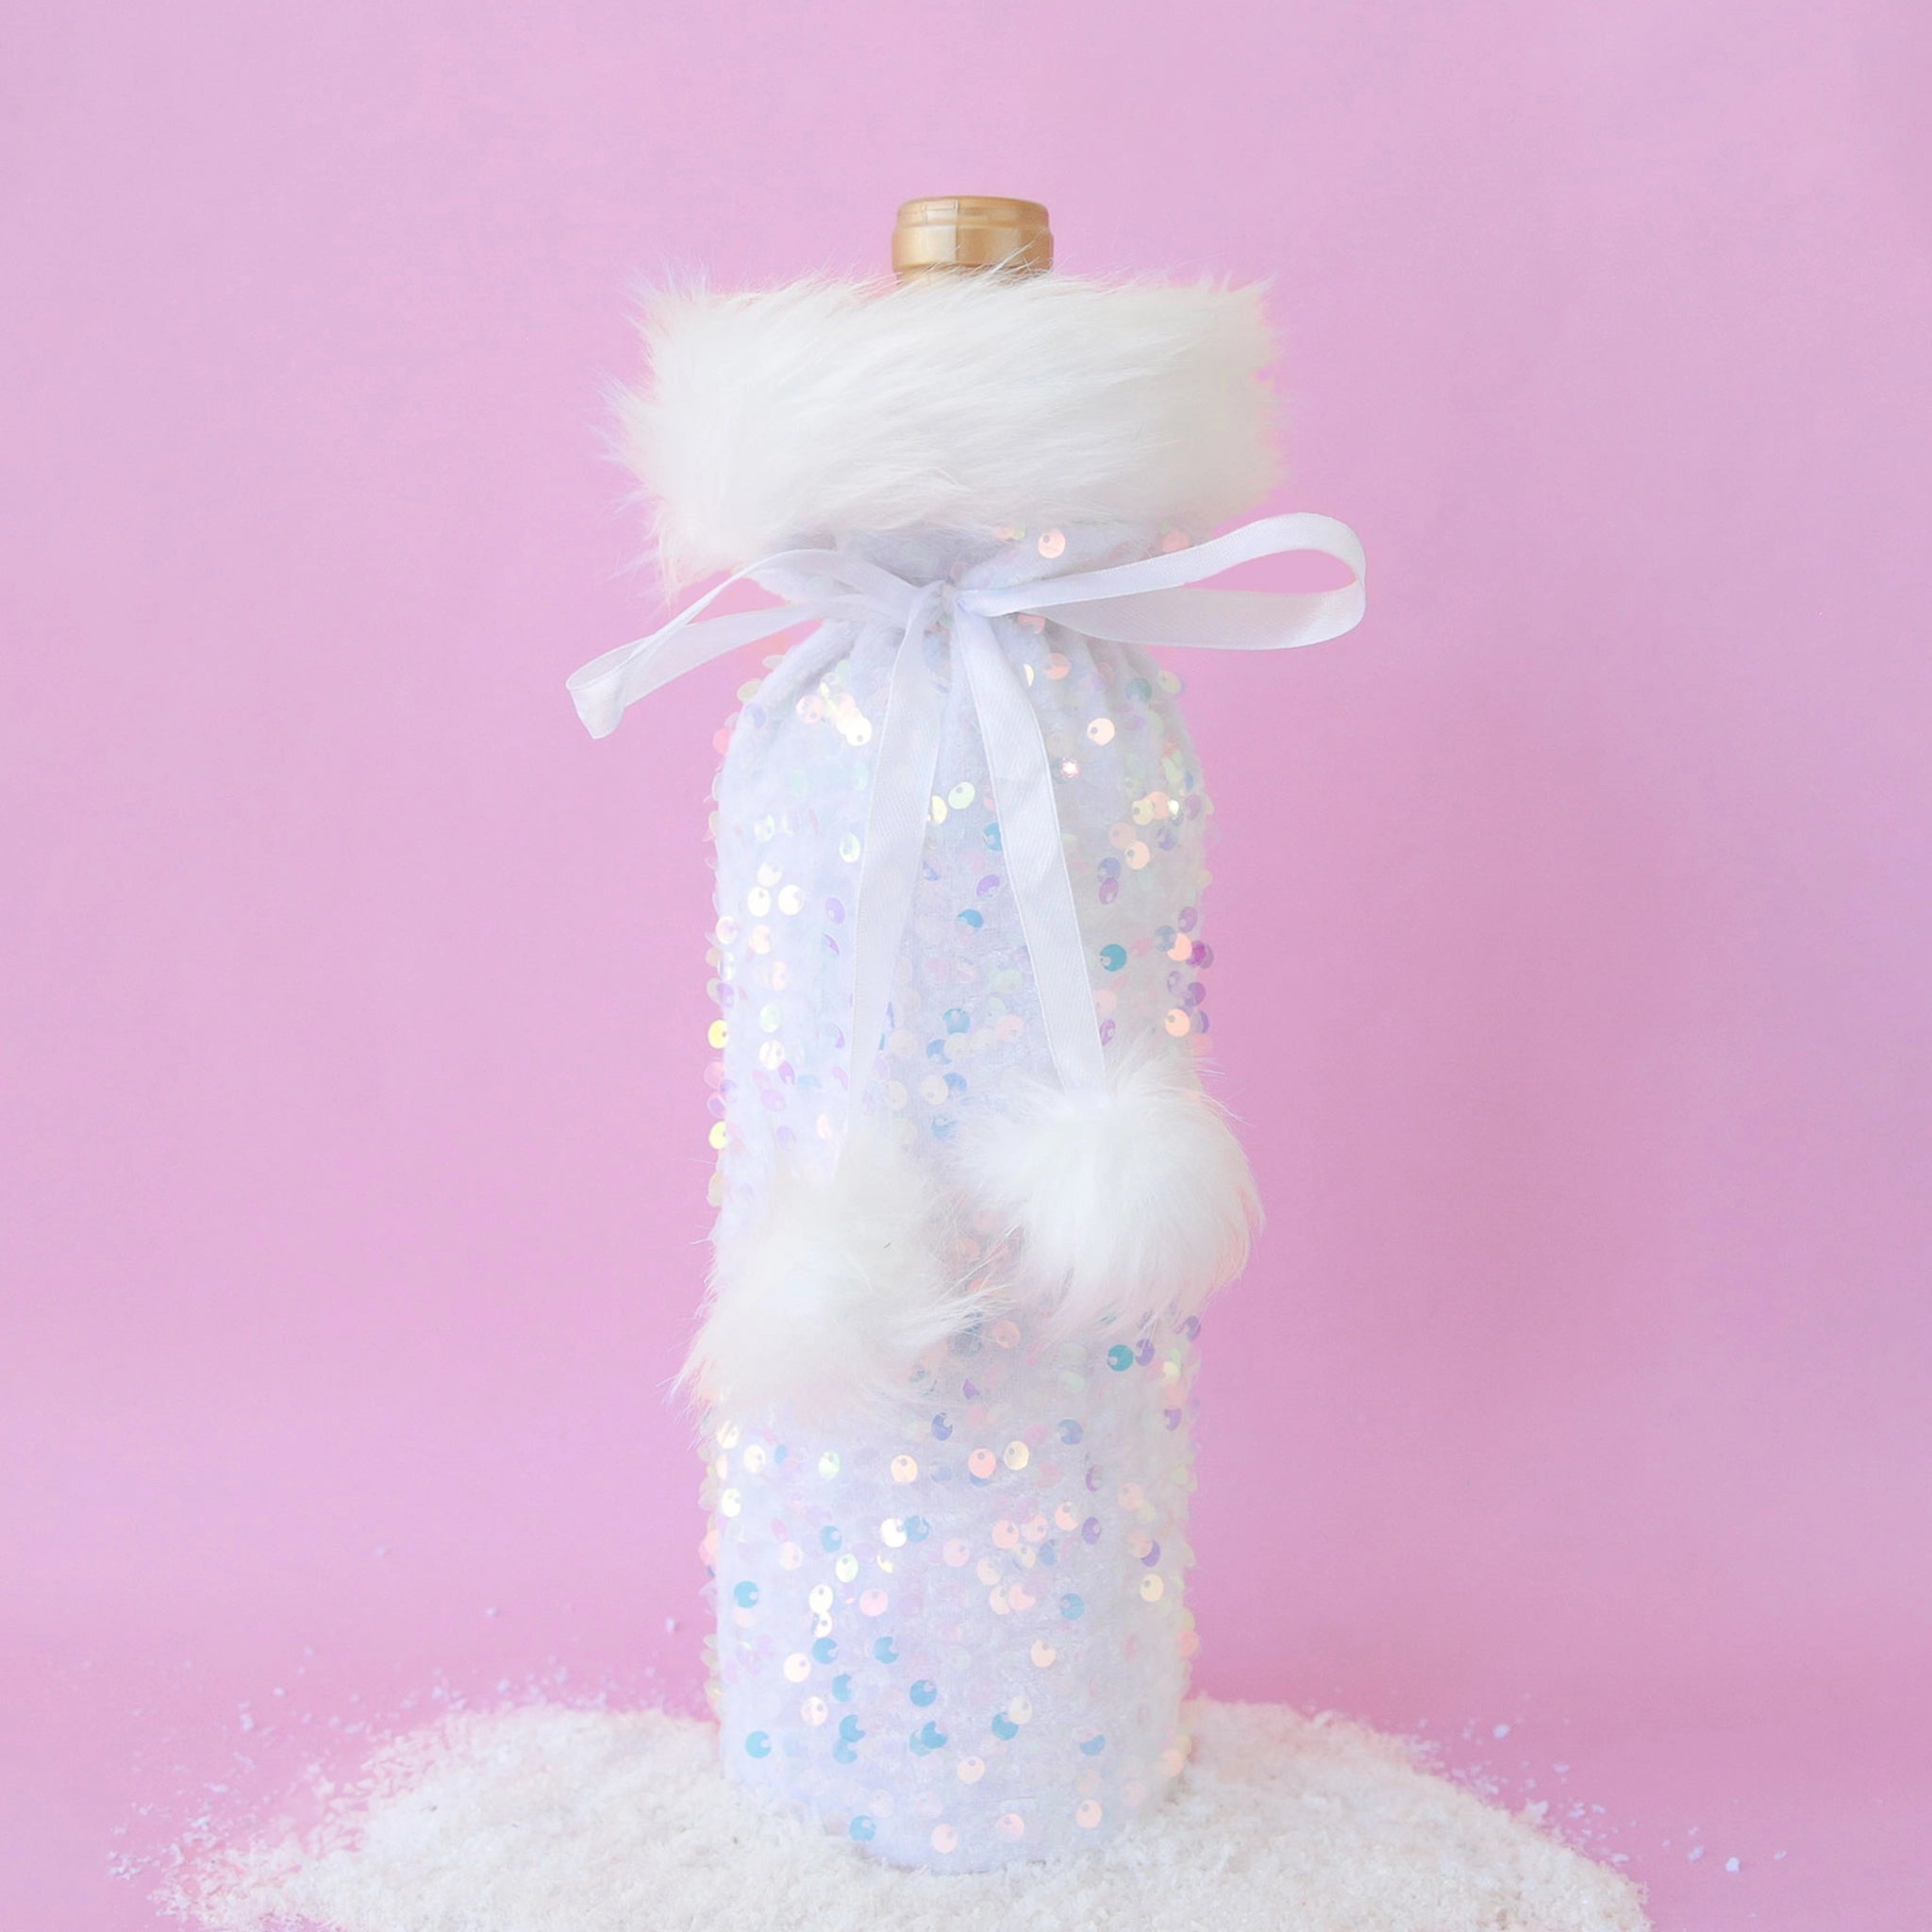 On a purple background is a iridescent and white wine bag with fluffy white faux fur lining the top and a pom pom bow to tie.